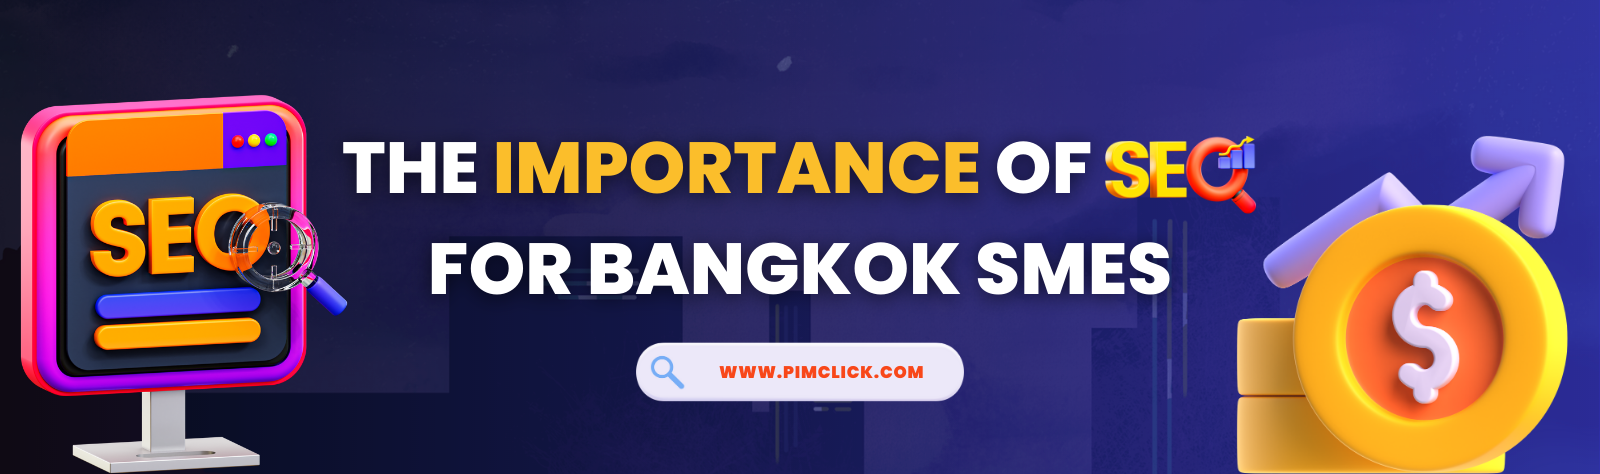 The Importance of SEO for Bangkok SMEs